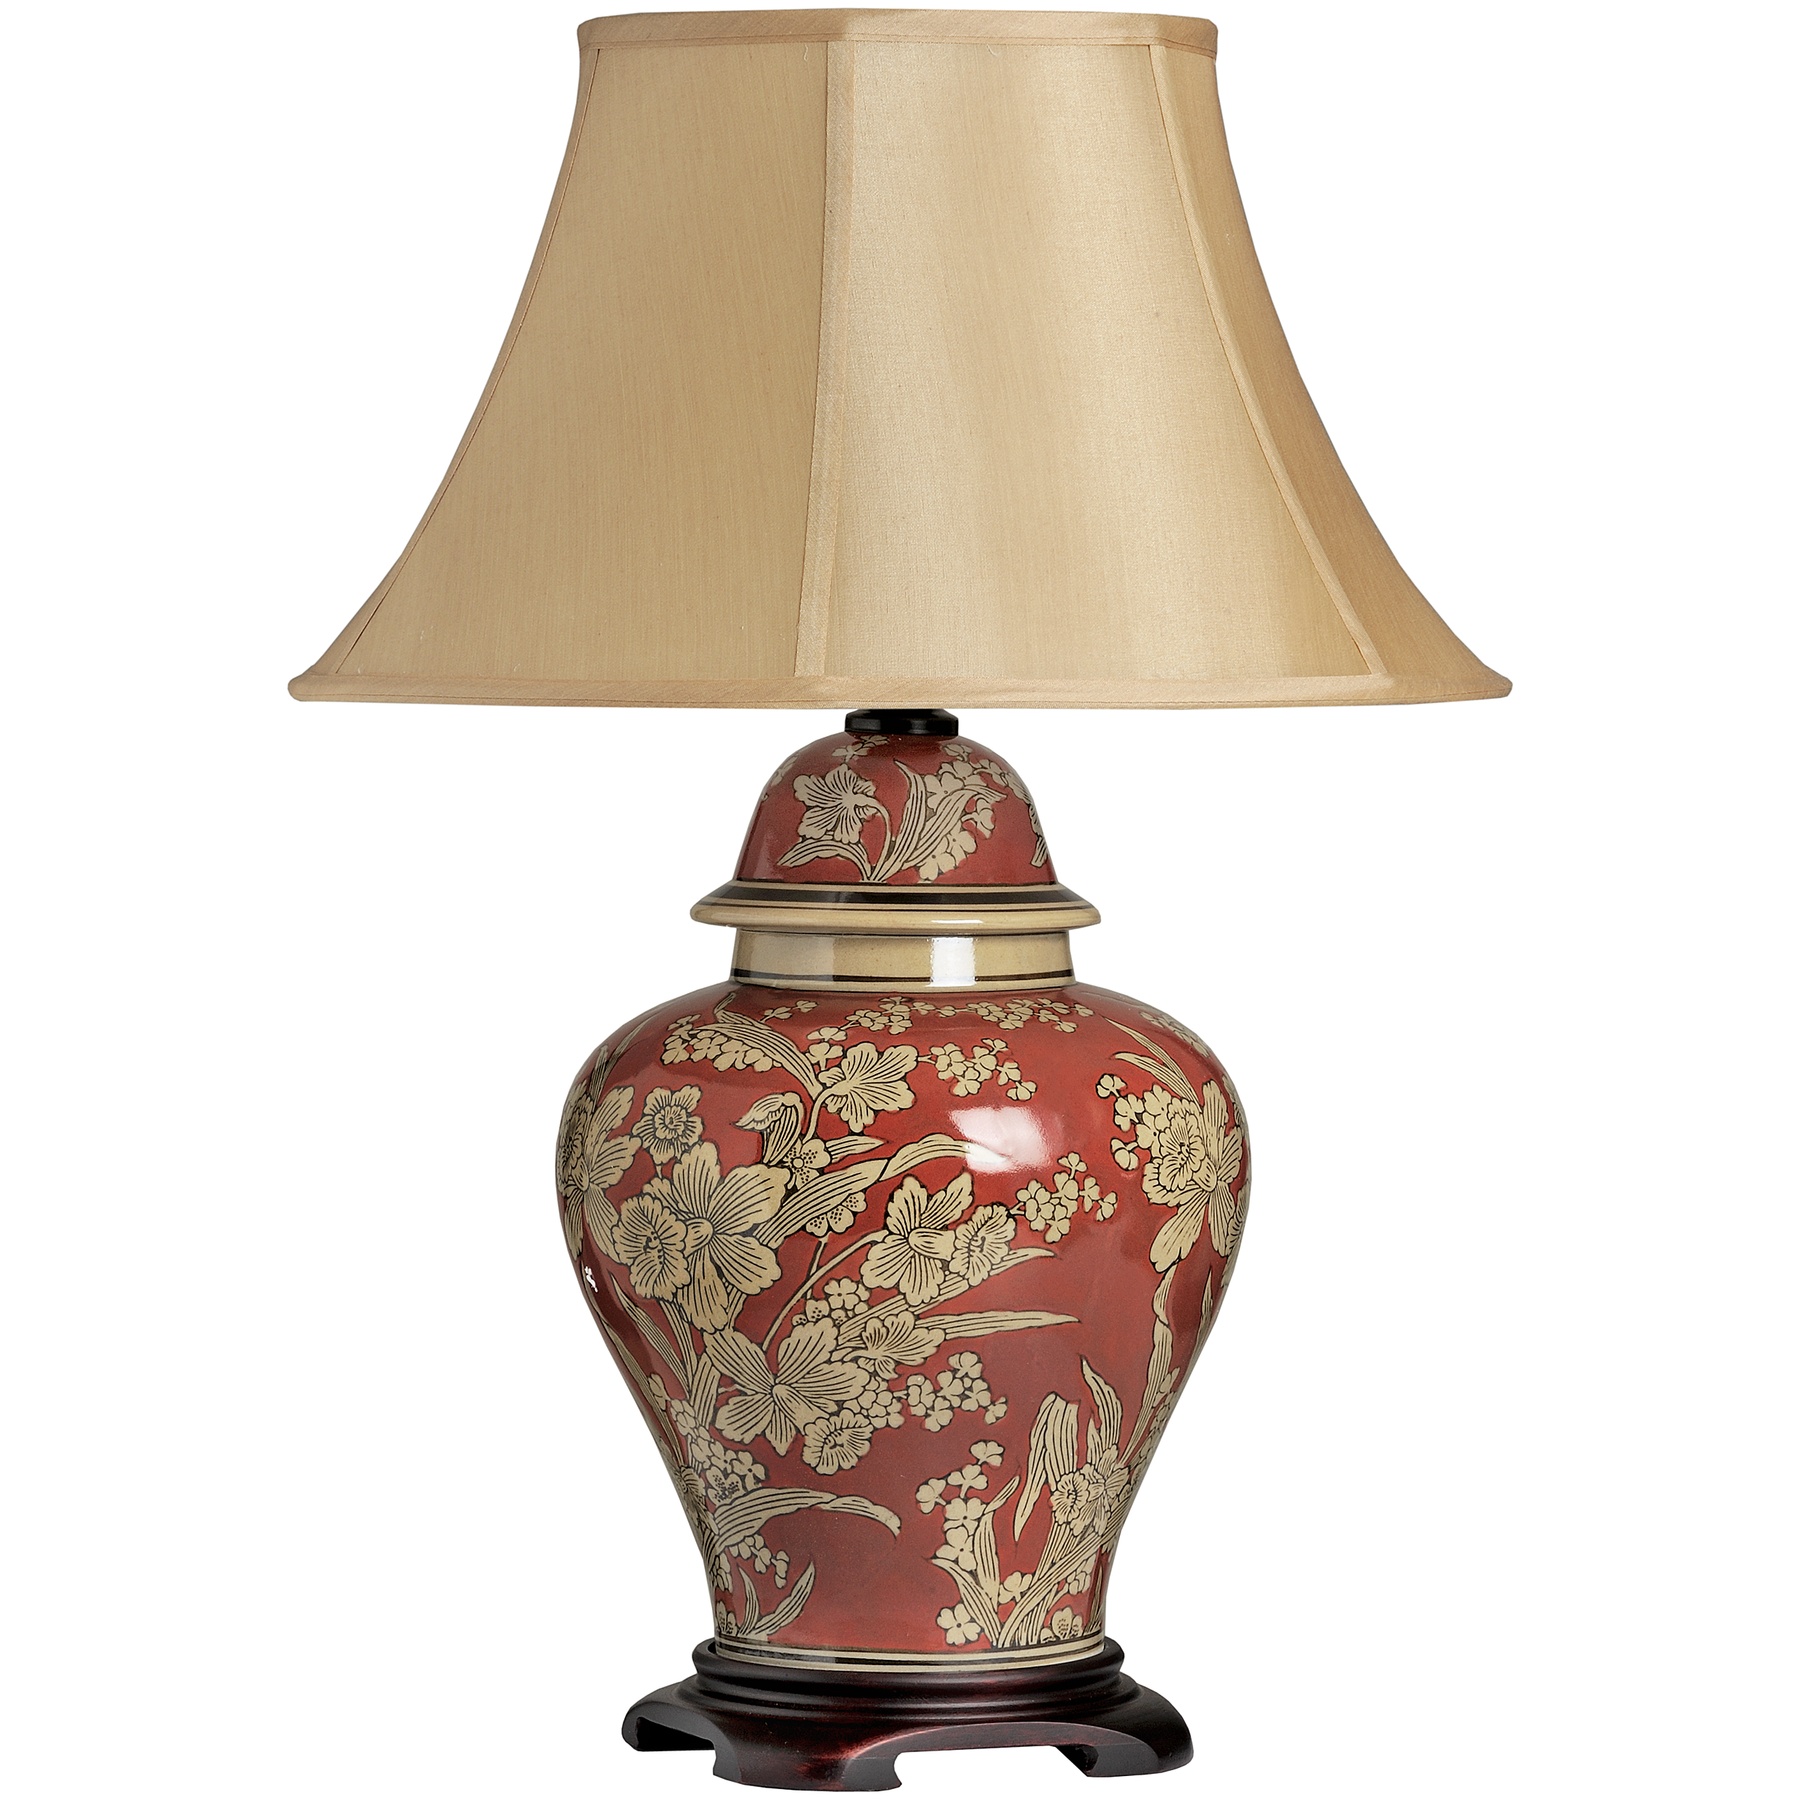 100 Red Table Lamps Contemporary Table Lamps For A Bedroom